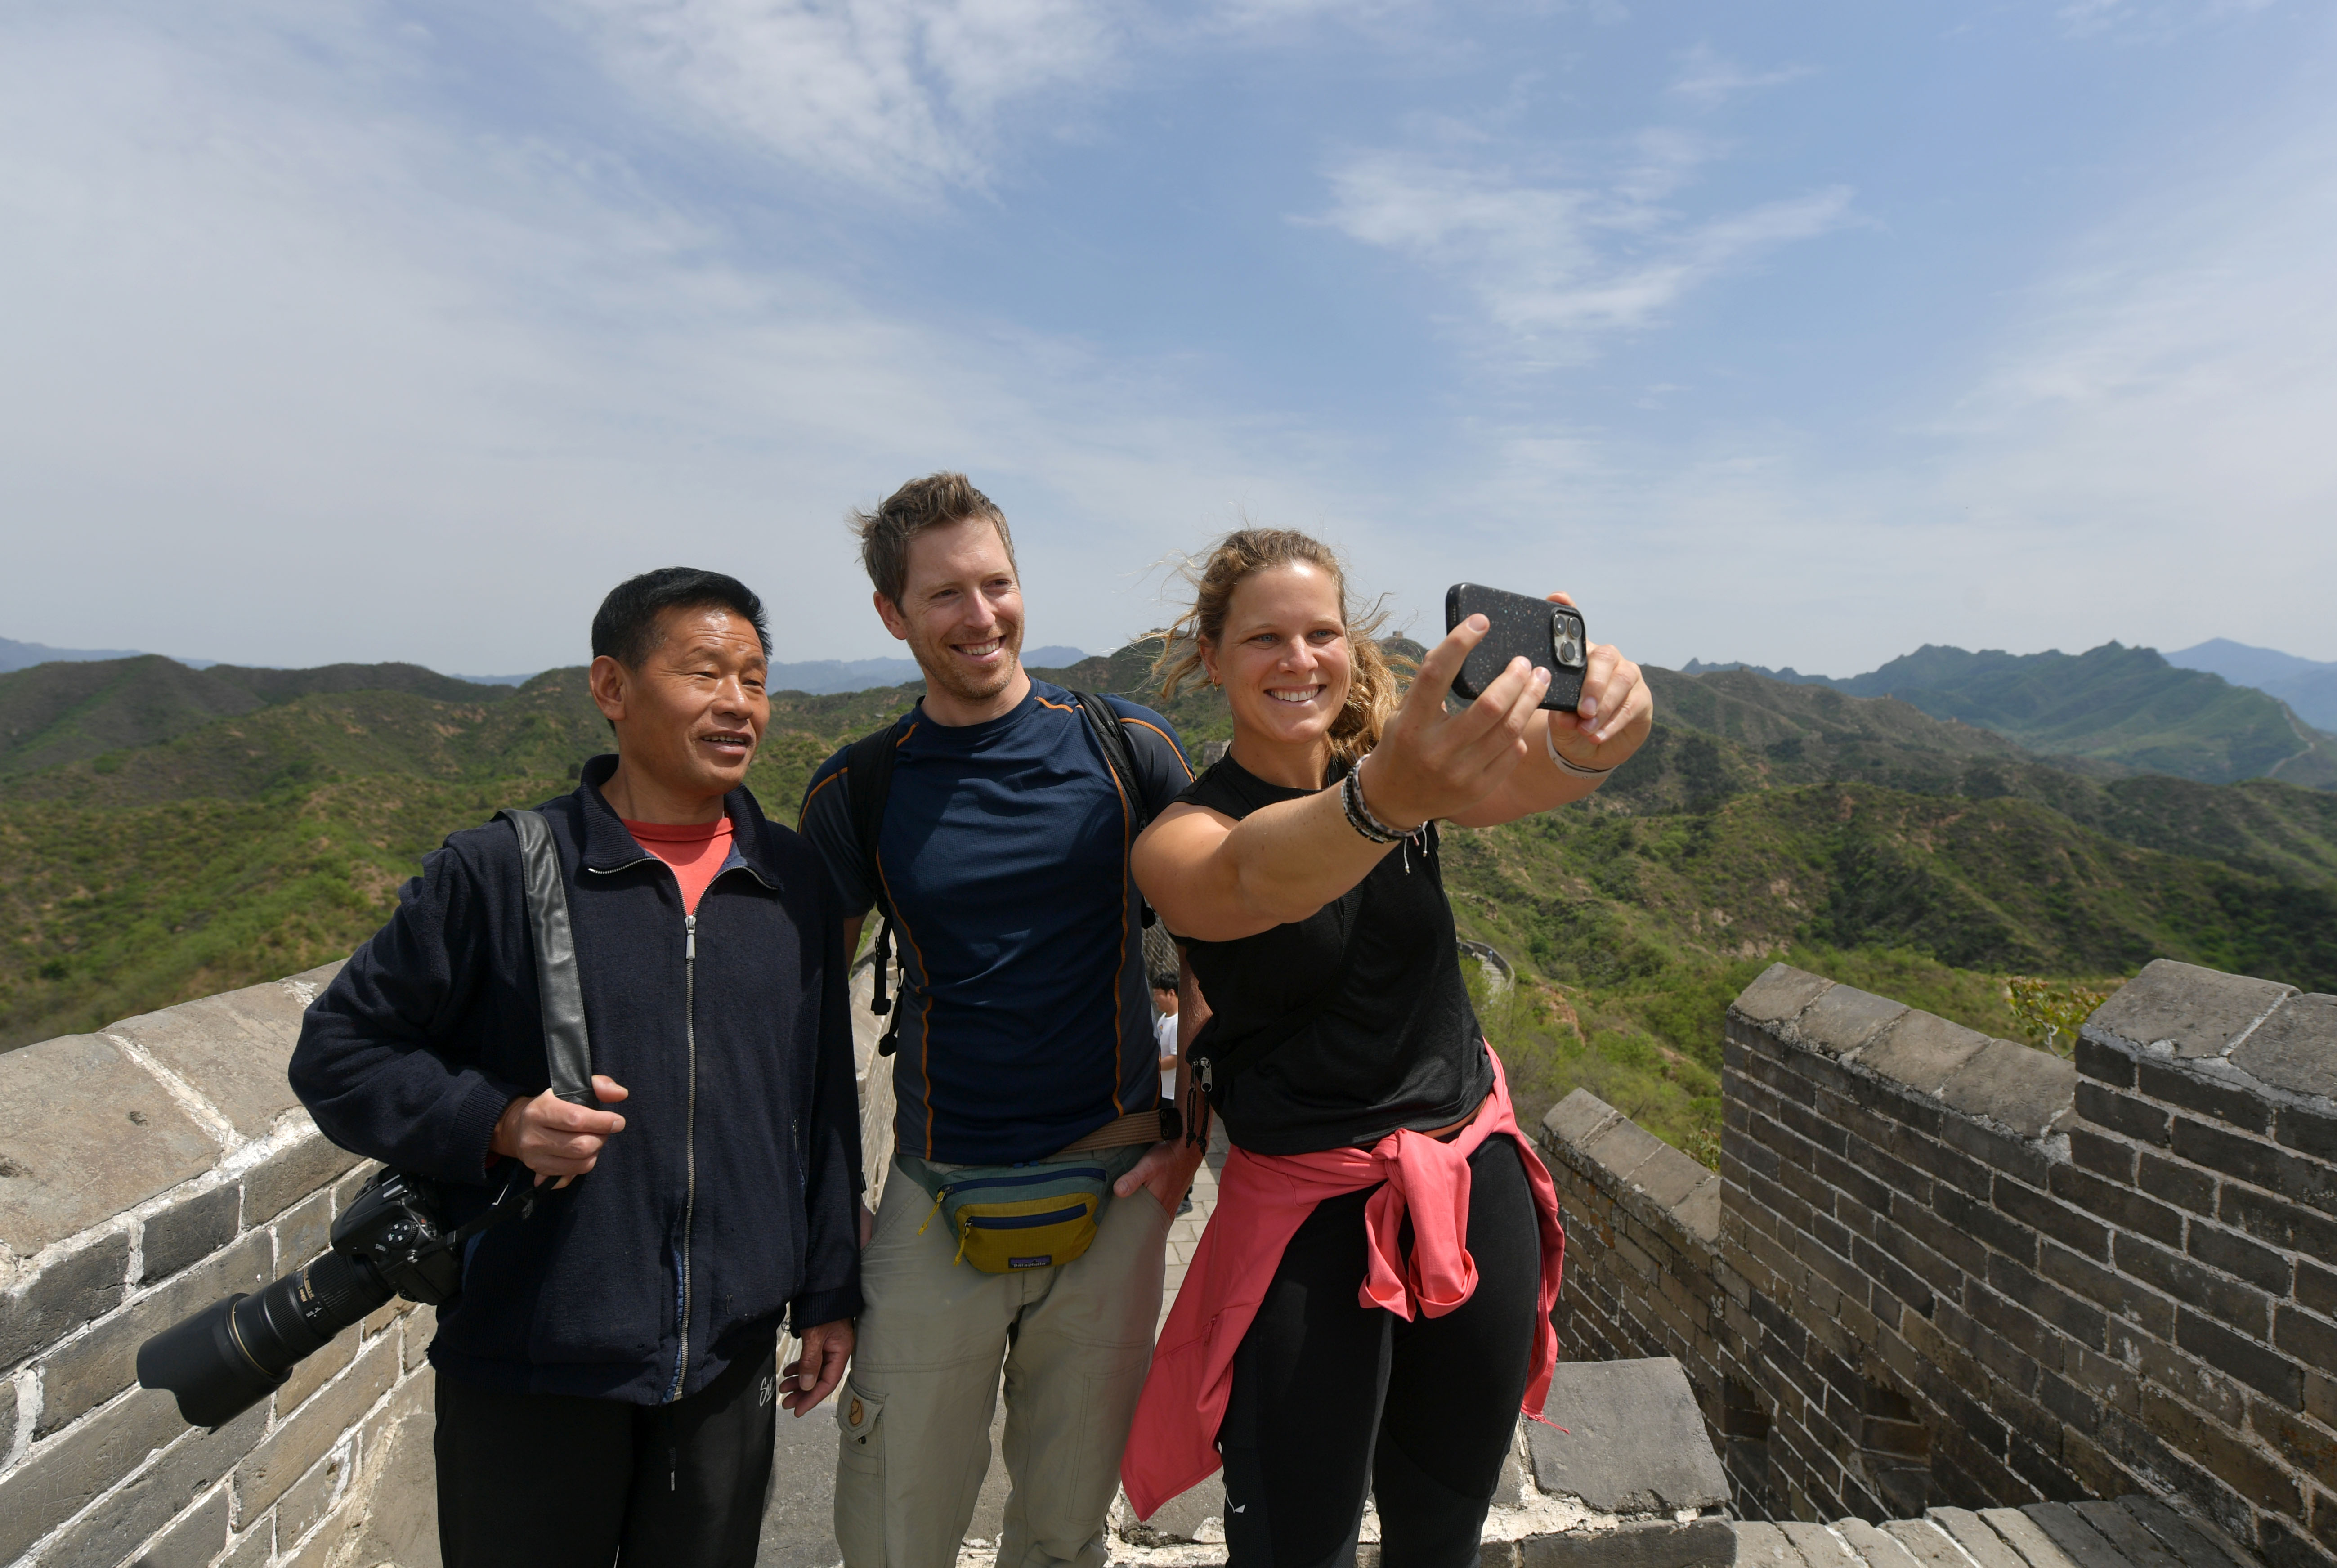 Zhou Wanping (left) takes photos with visitors to the Great Wall. /CNSPHOTO